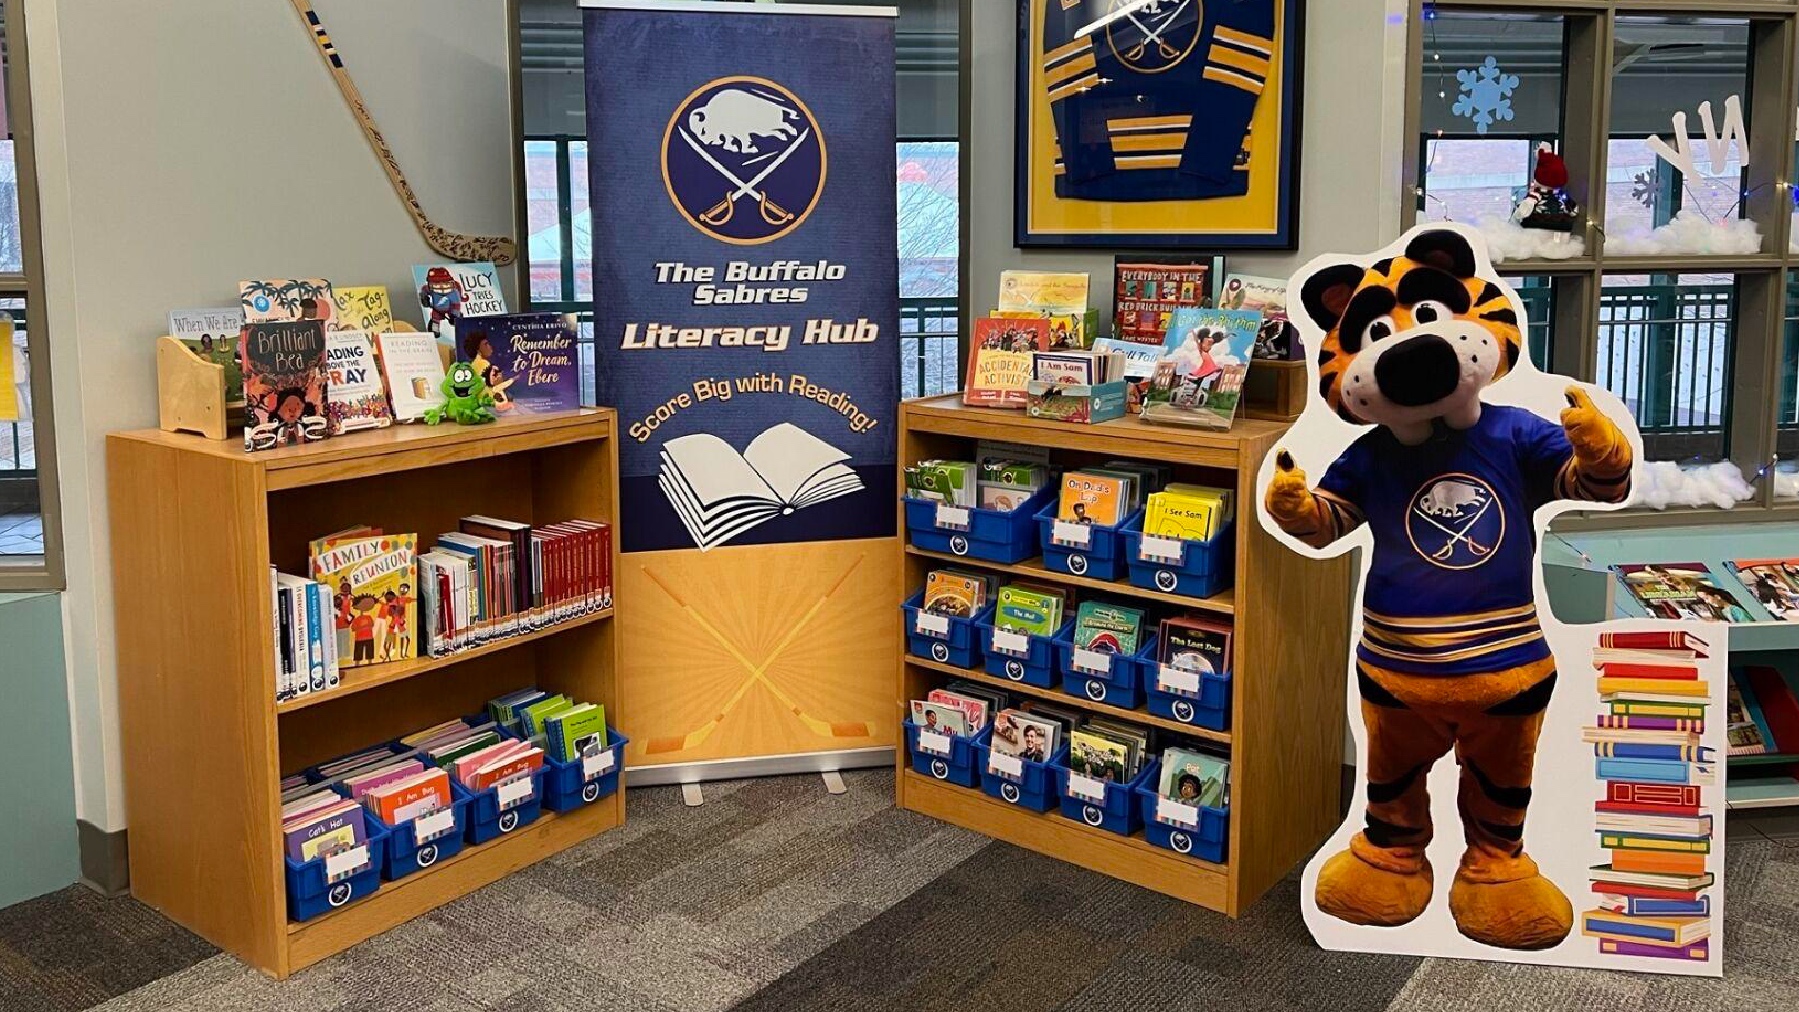 BUFFALO SABRES FOUNDATION JOINS WNY LITERACY INITIATIVE & DONATES LITERACY HUBS TO SCHOOLS Image